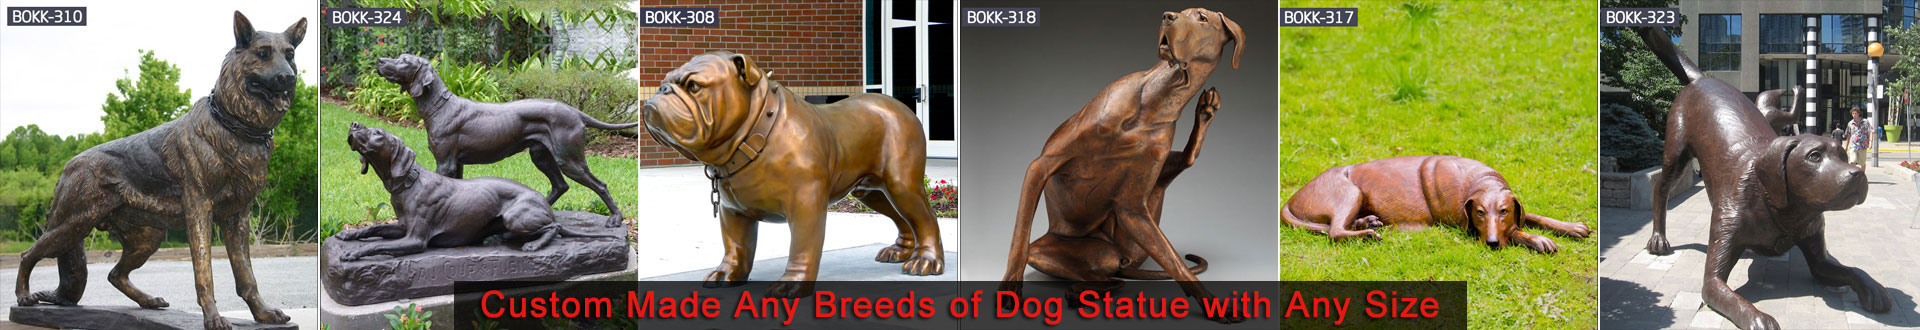 Hound Statue for Sale Custom Dog Statues for Outdoor